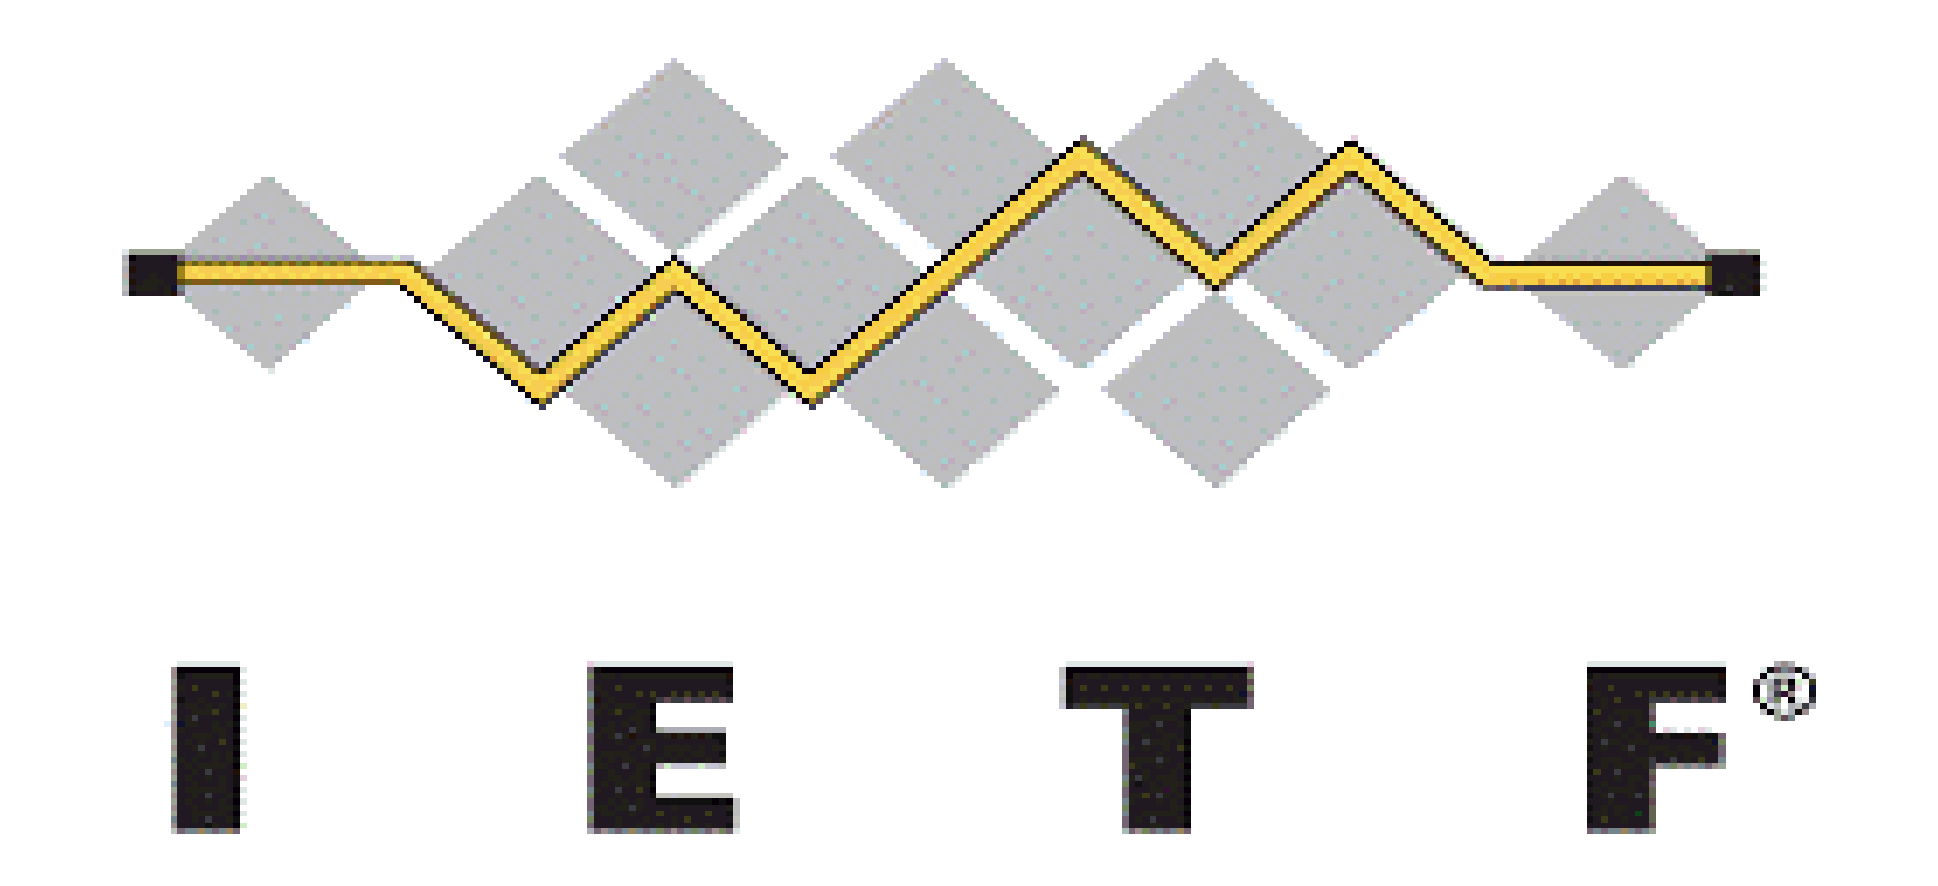 IETF: Internet Engineering Task Force http://www.ietf.org/ The goal of the IETF is to make the Internet work better.